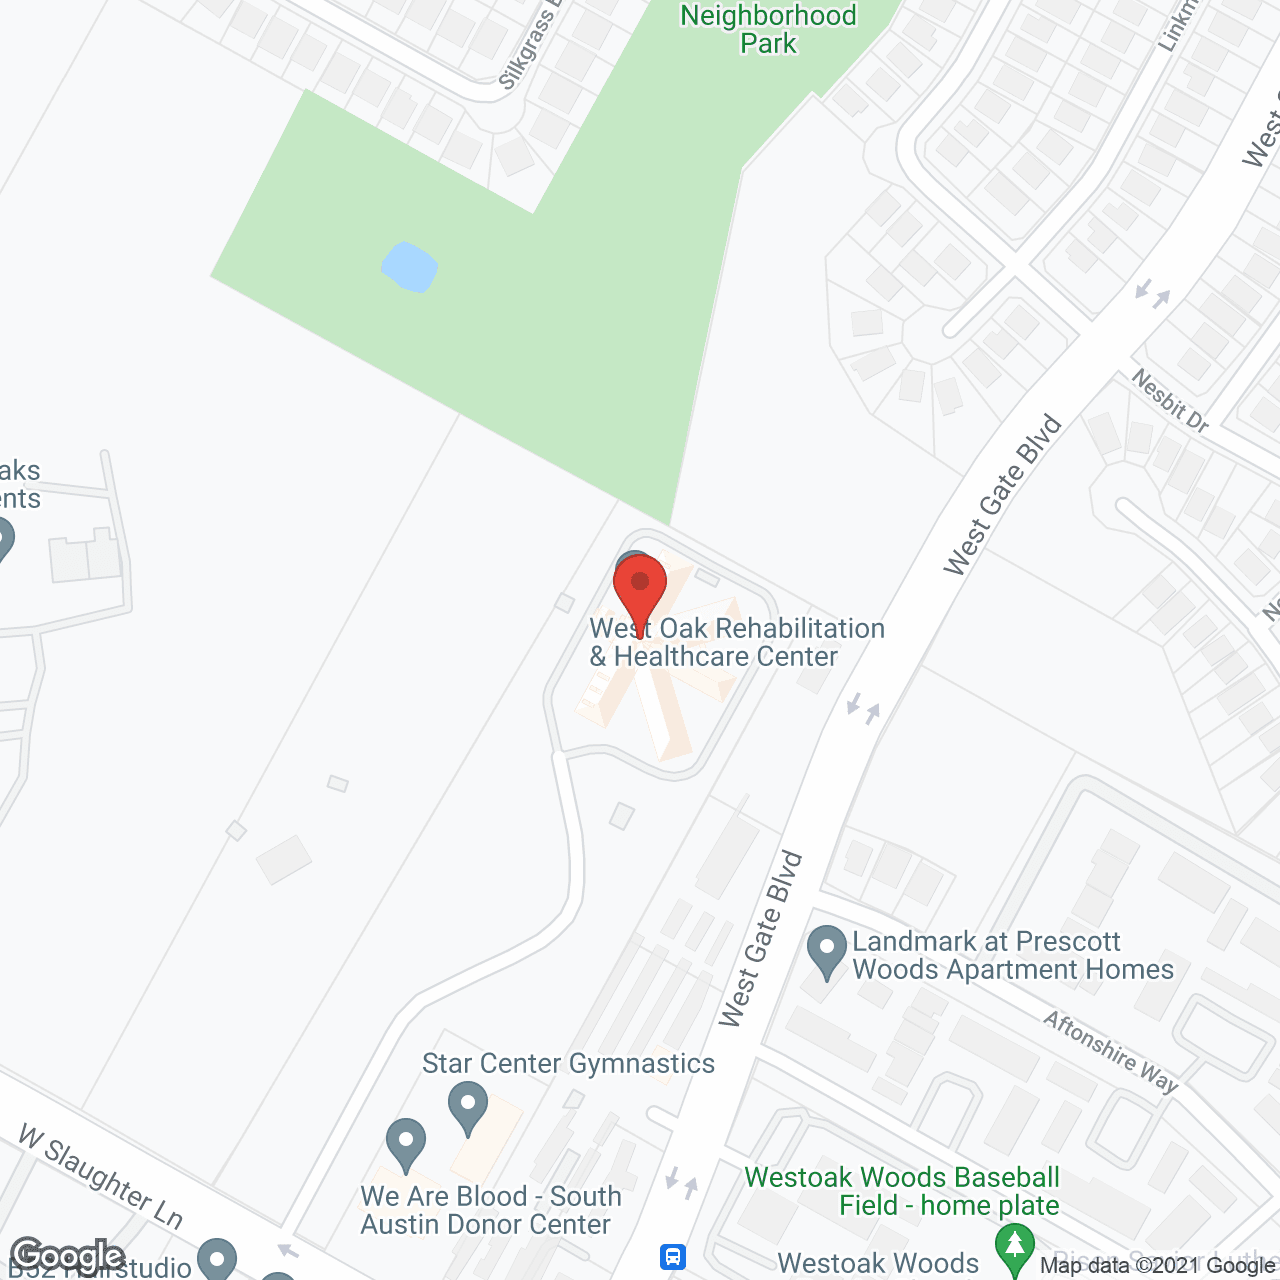 West Oaks Rehabilitaion and Healthcare Center in google map